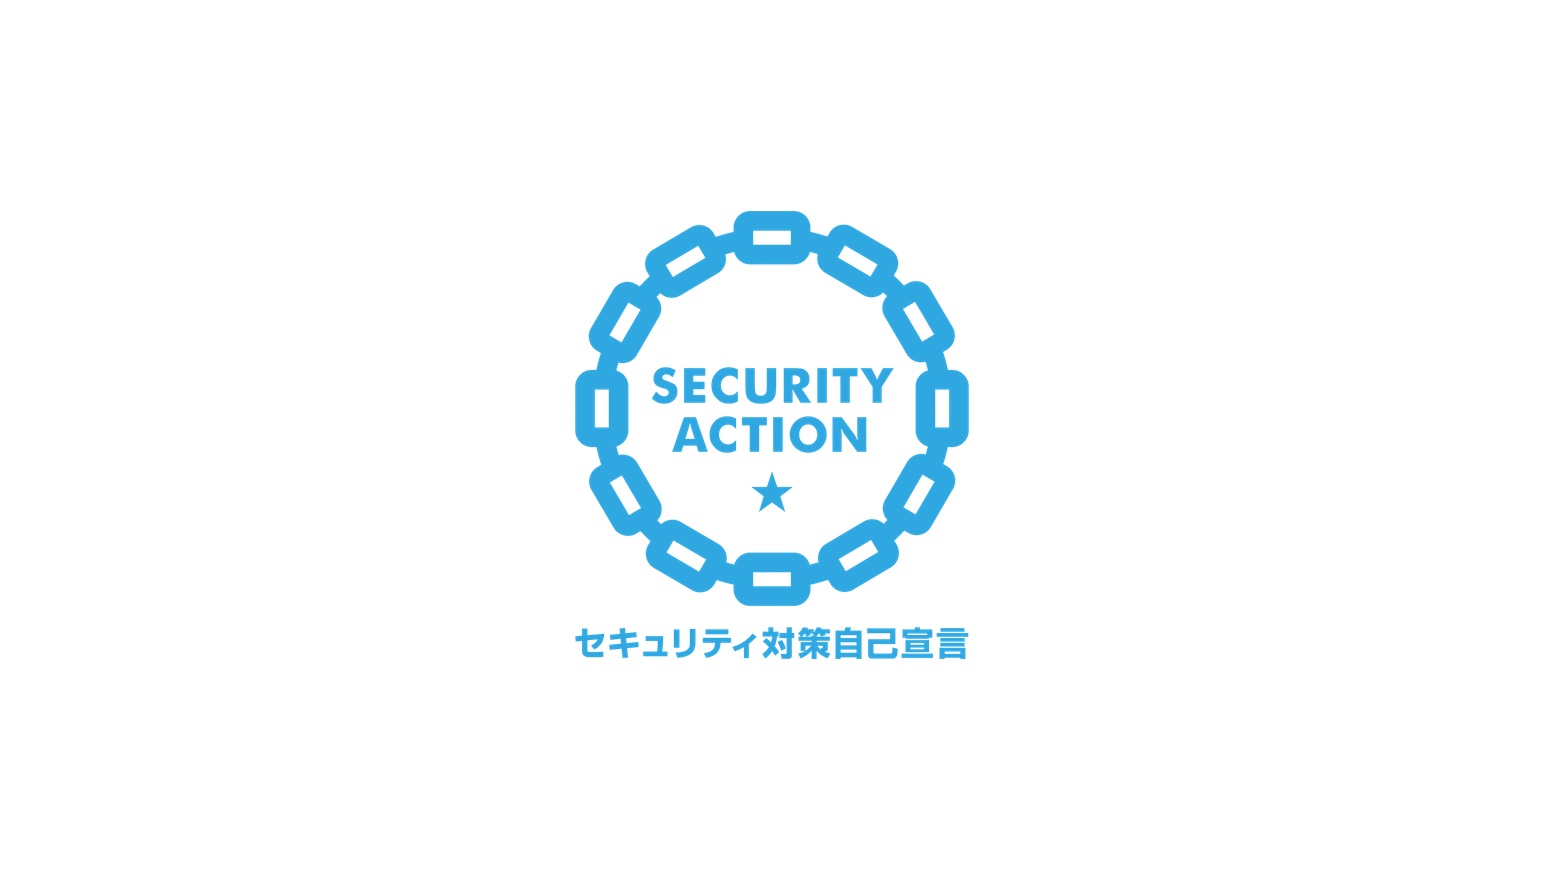 「SECURITY ACTION（一つ星）」を宣言のアイキャッチ